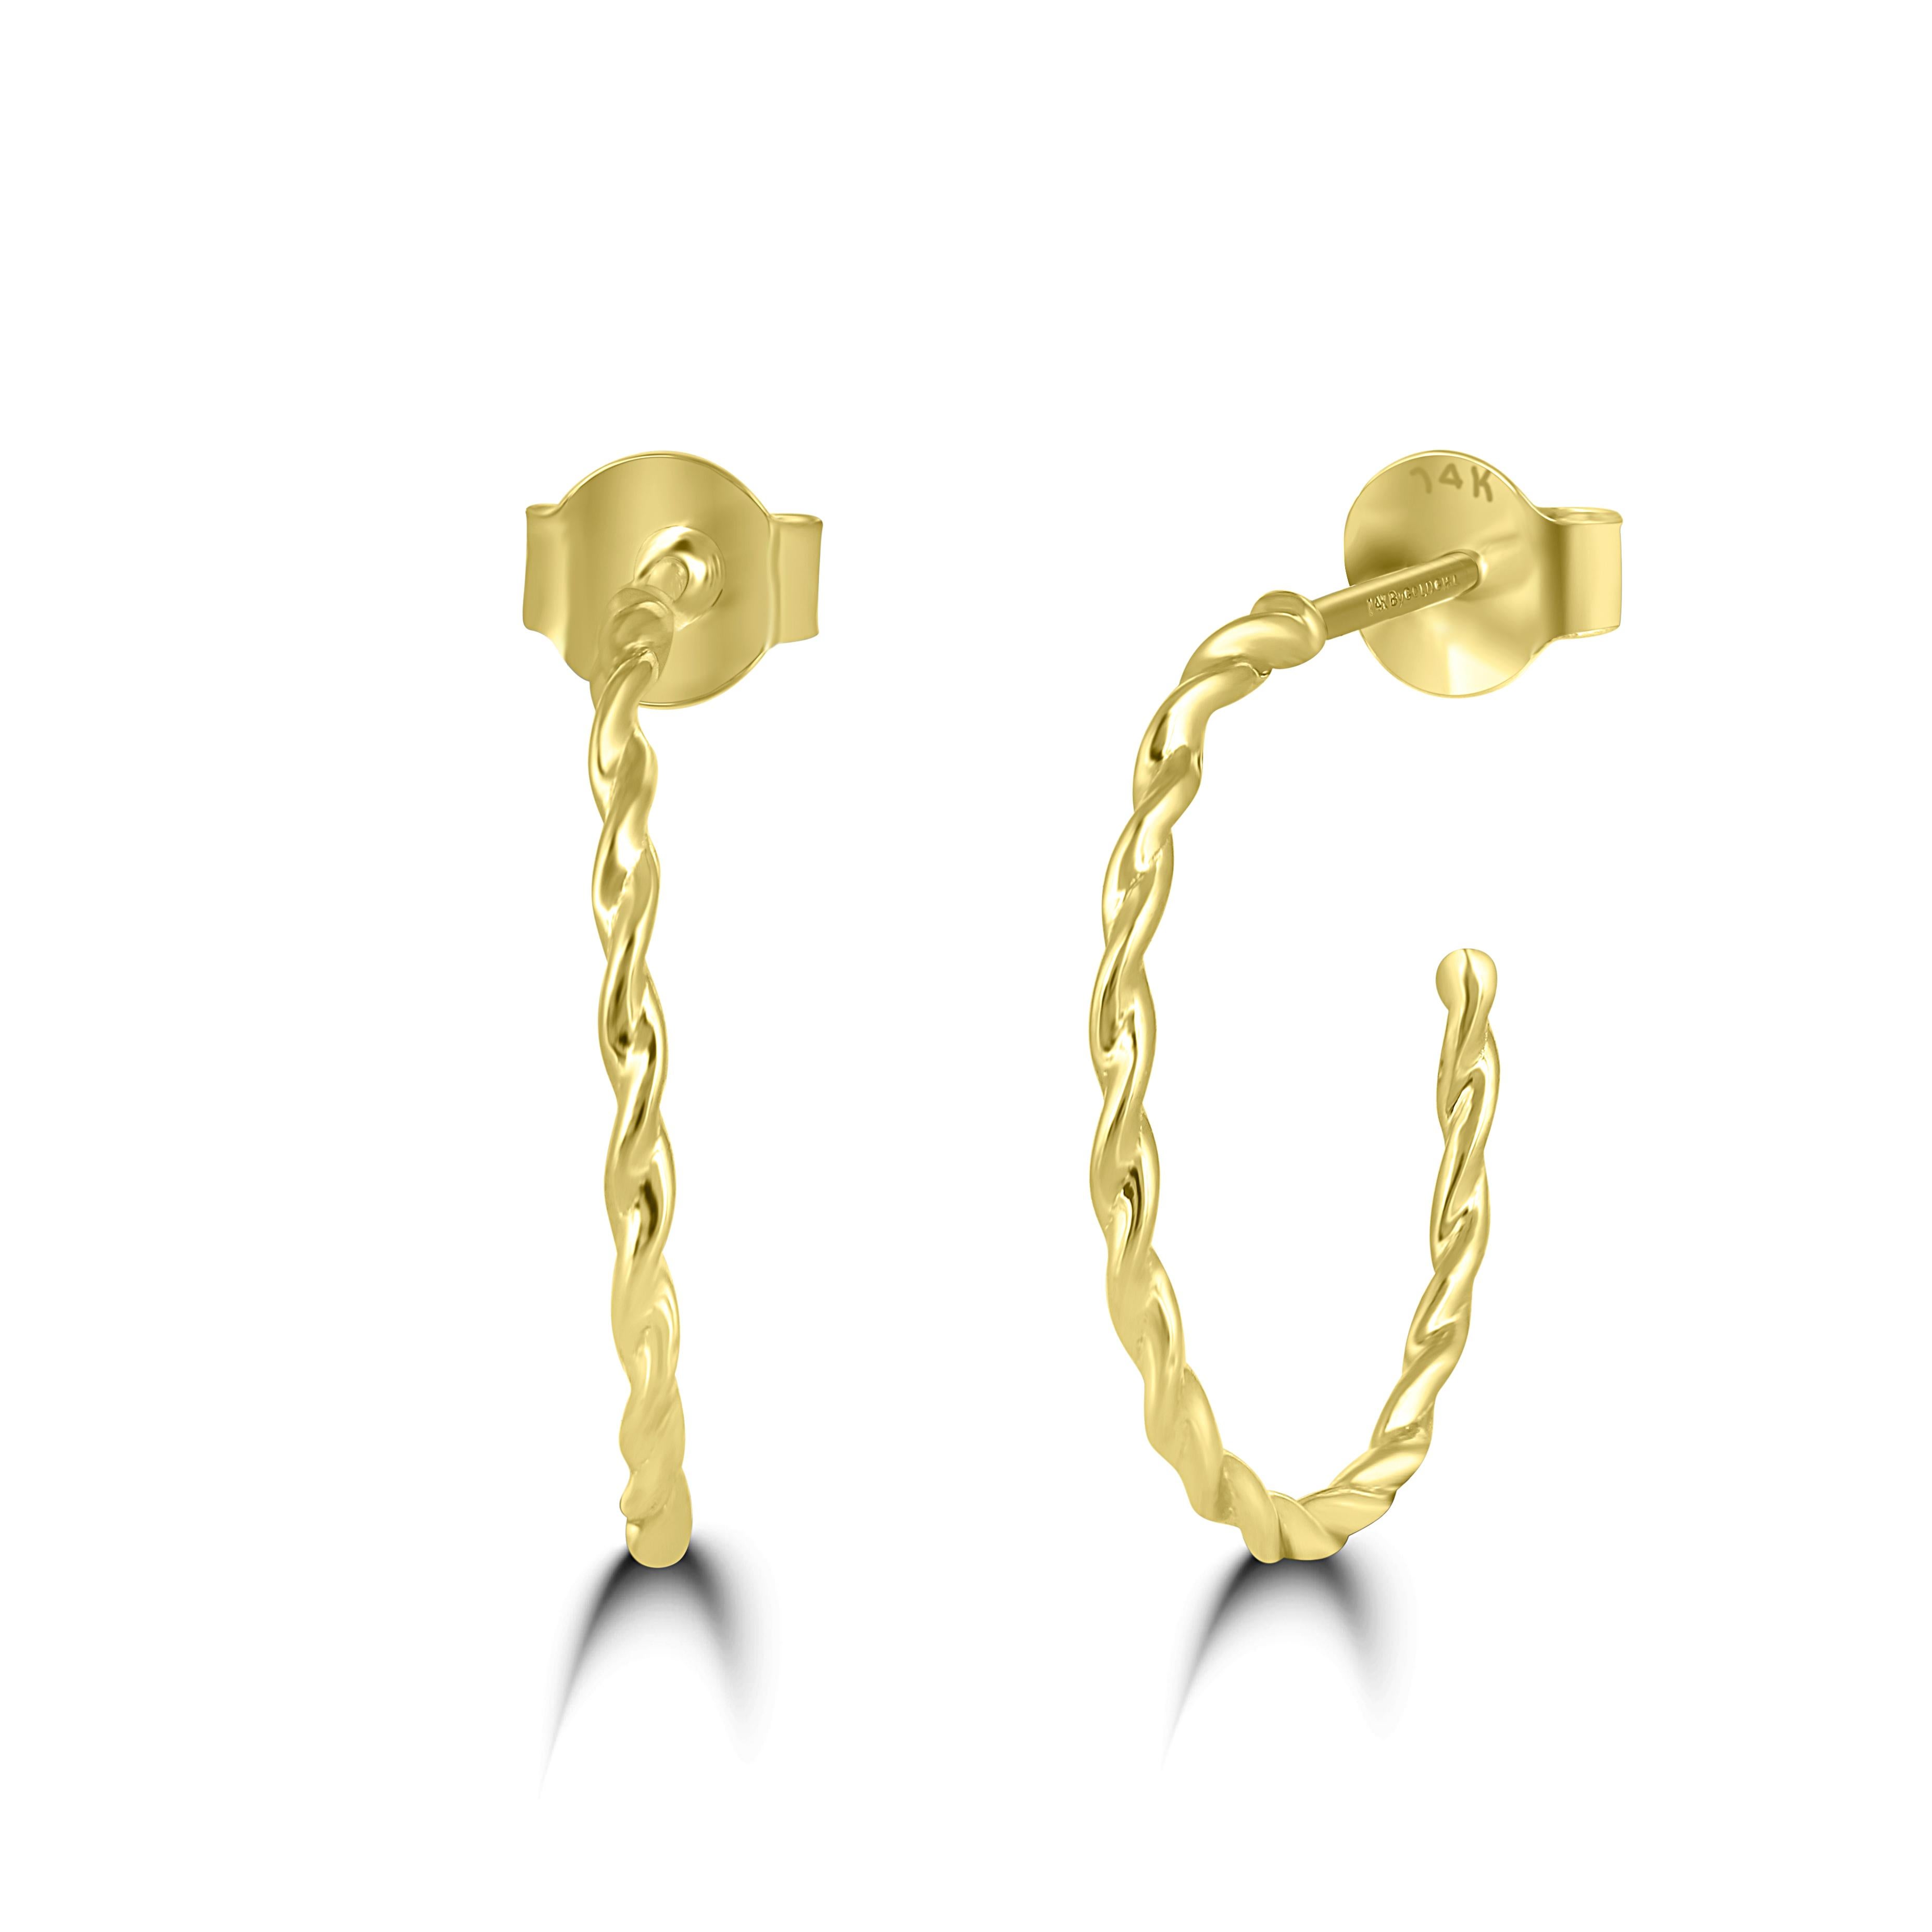 Luxle Hoop Earrings in 14K Yellow Gold In New Condition For Sale In New York, NY